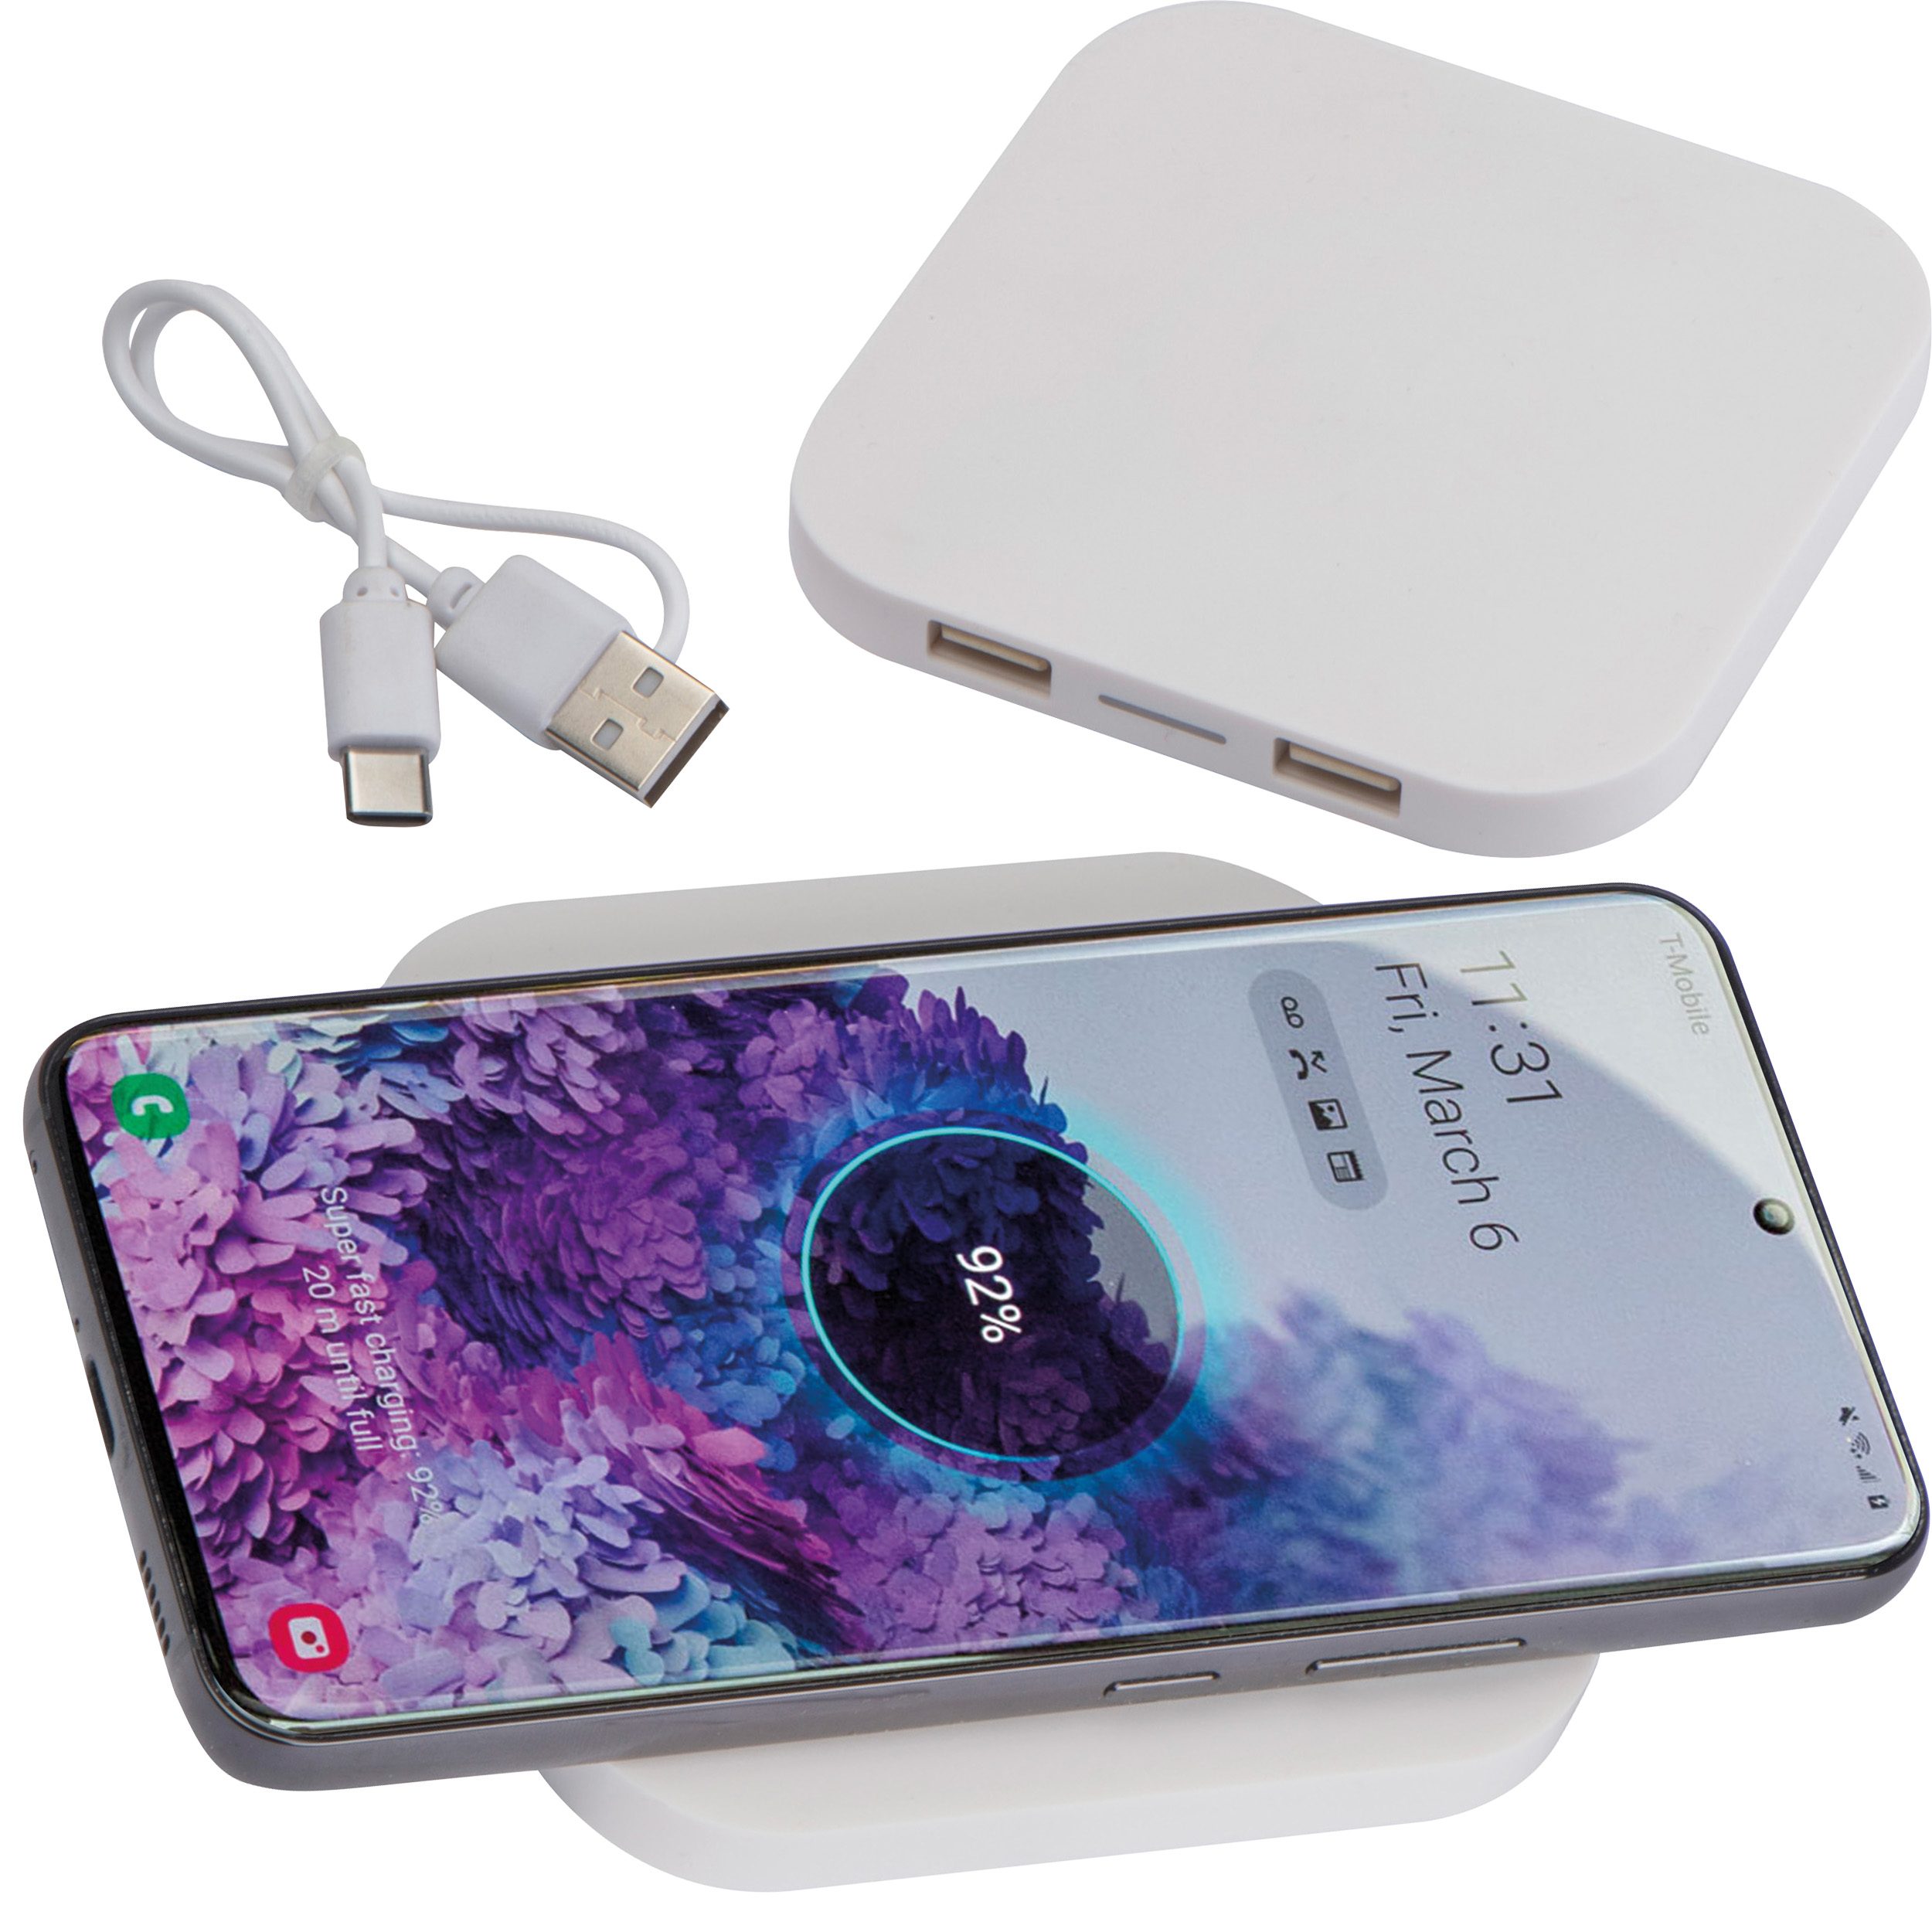 Wireless charger with 2 USB ports